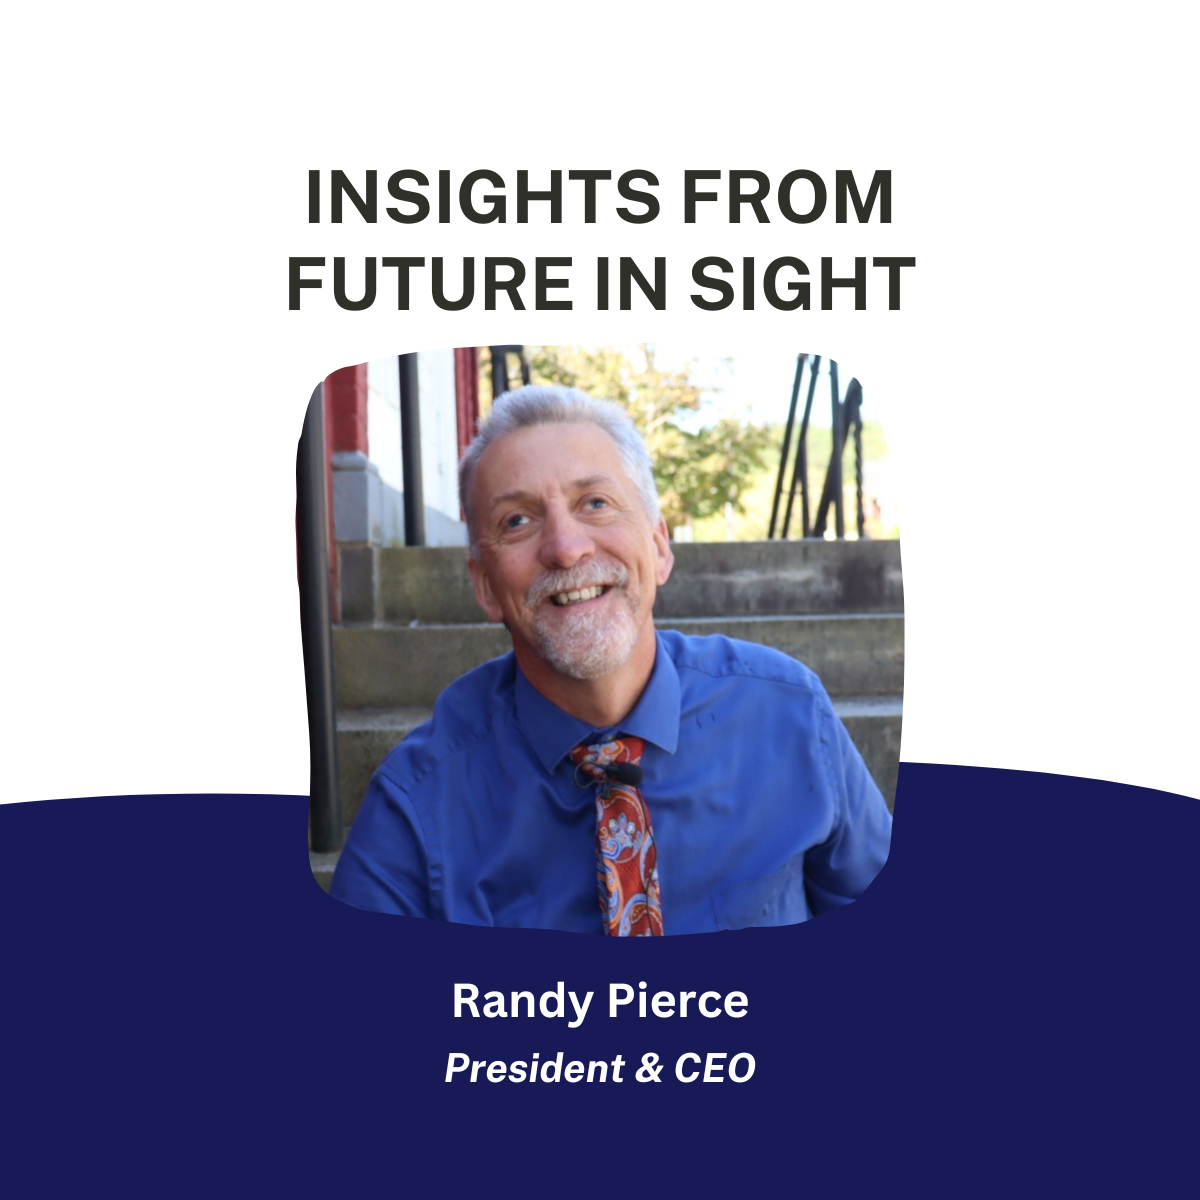 Randy Pierce - Insights from Future In Sight